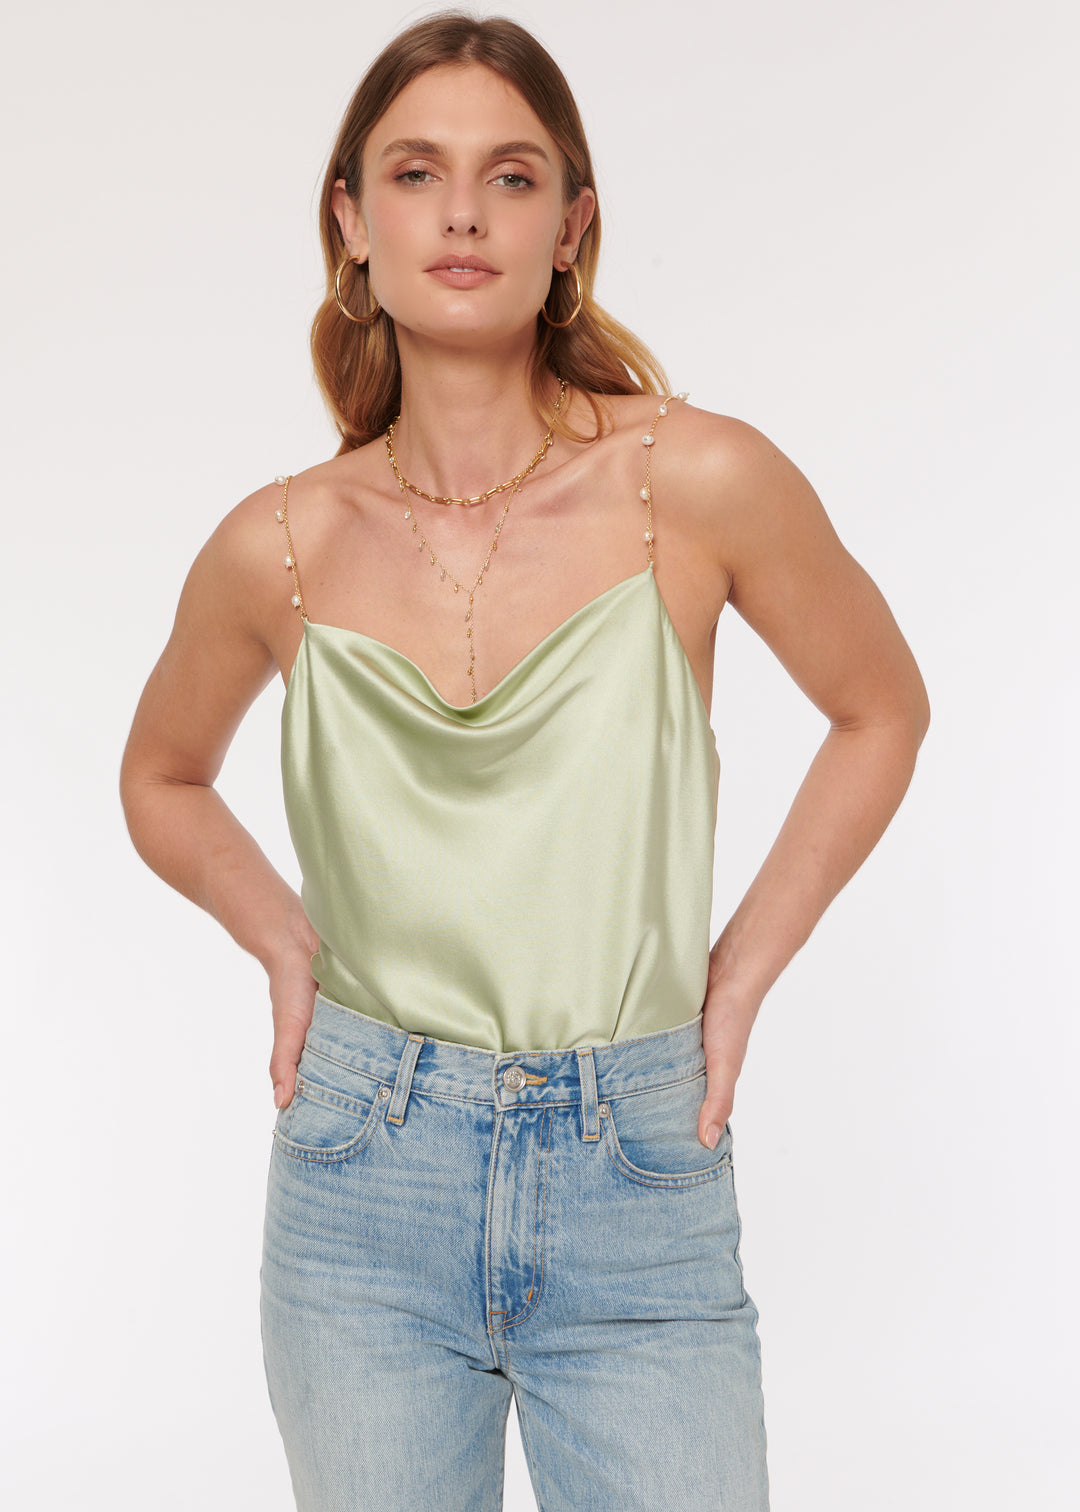 Cami NYC - Busy Cami in Aloe